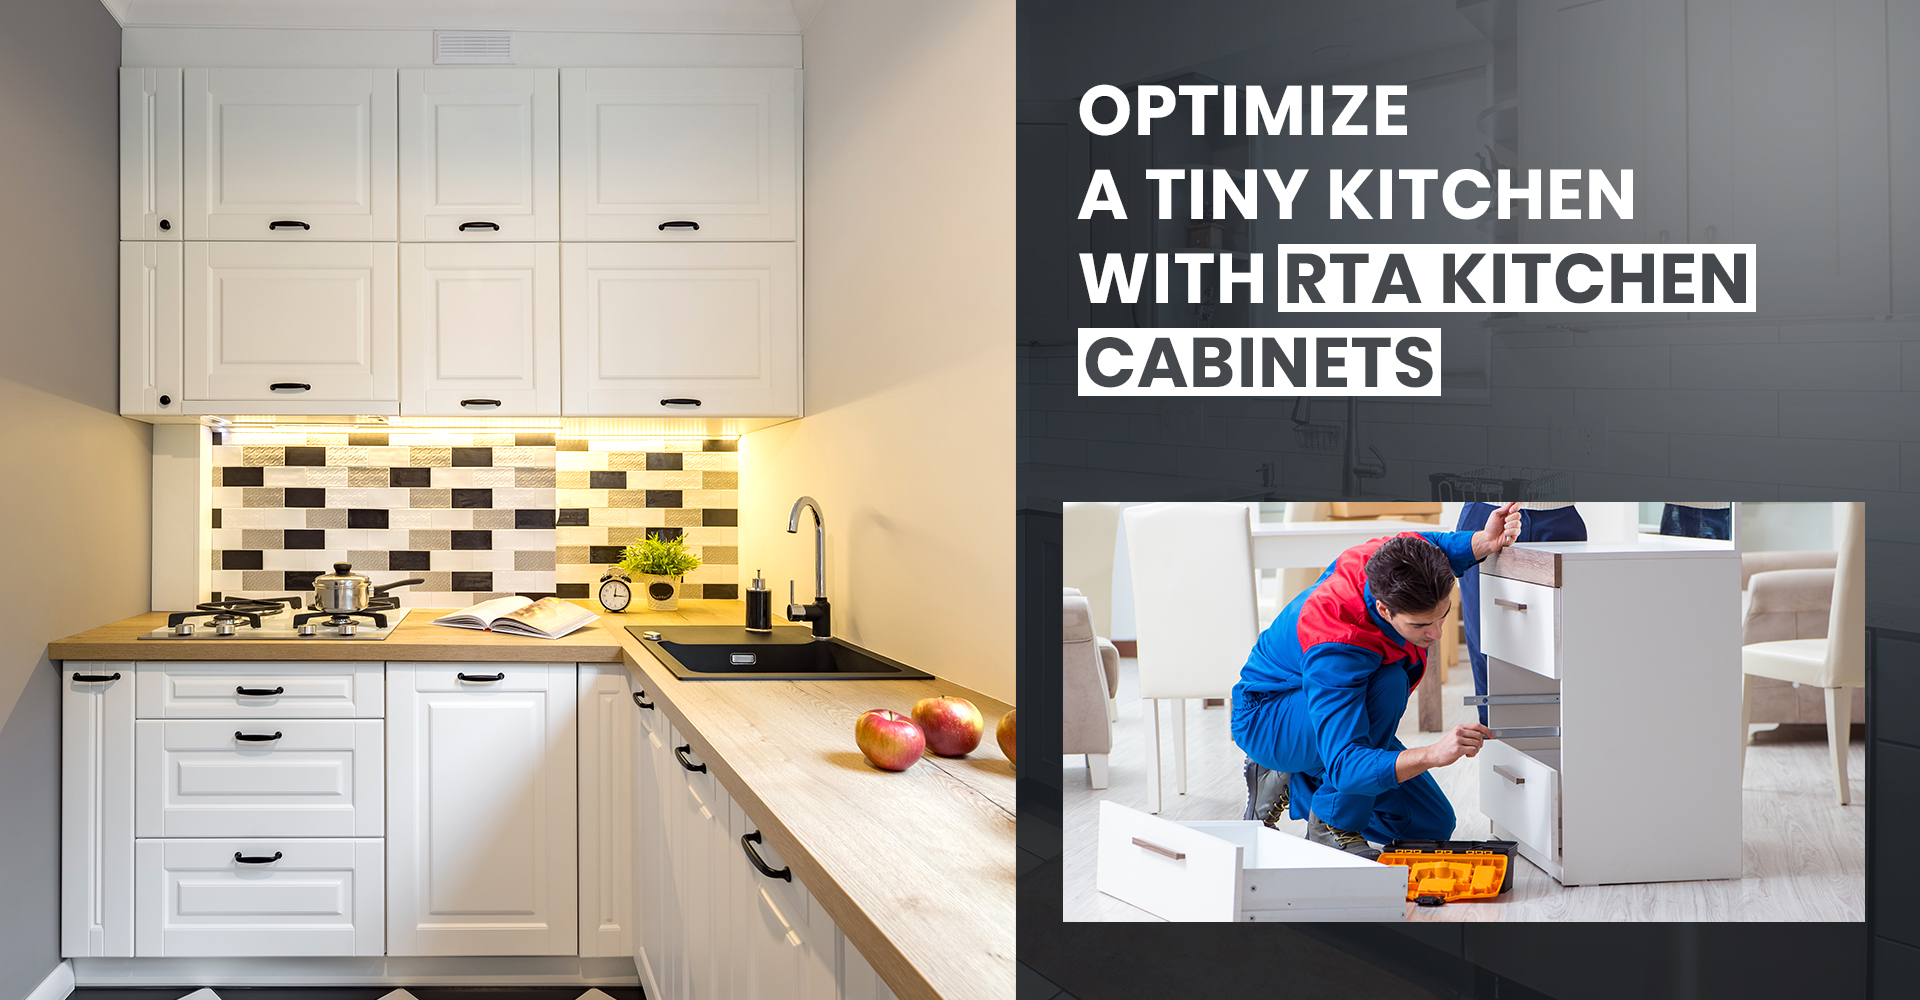 Optimize a Tiny Kitchen with RTA Kitchen Cabinets - CabinetCorp